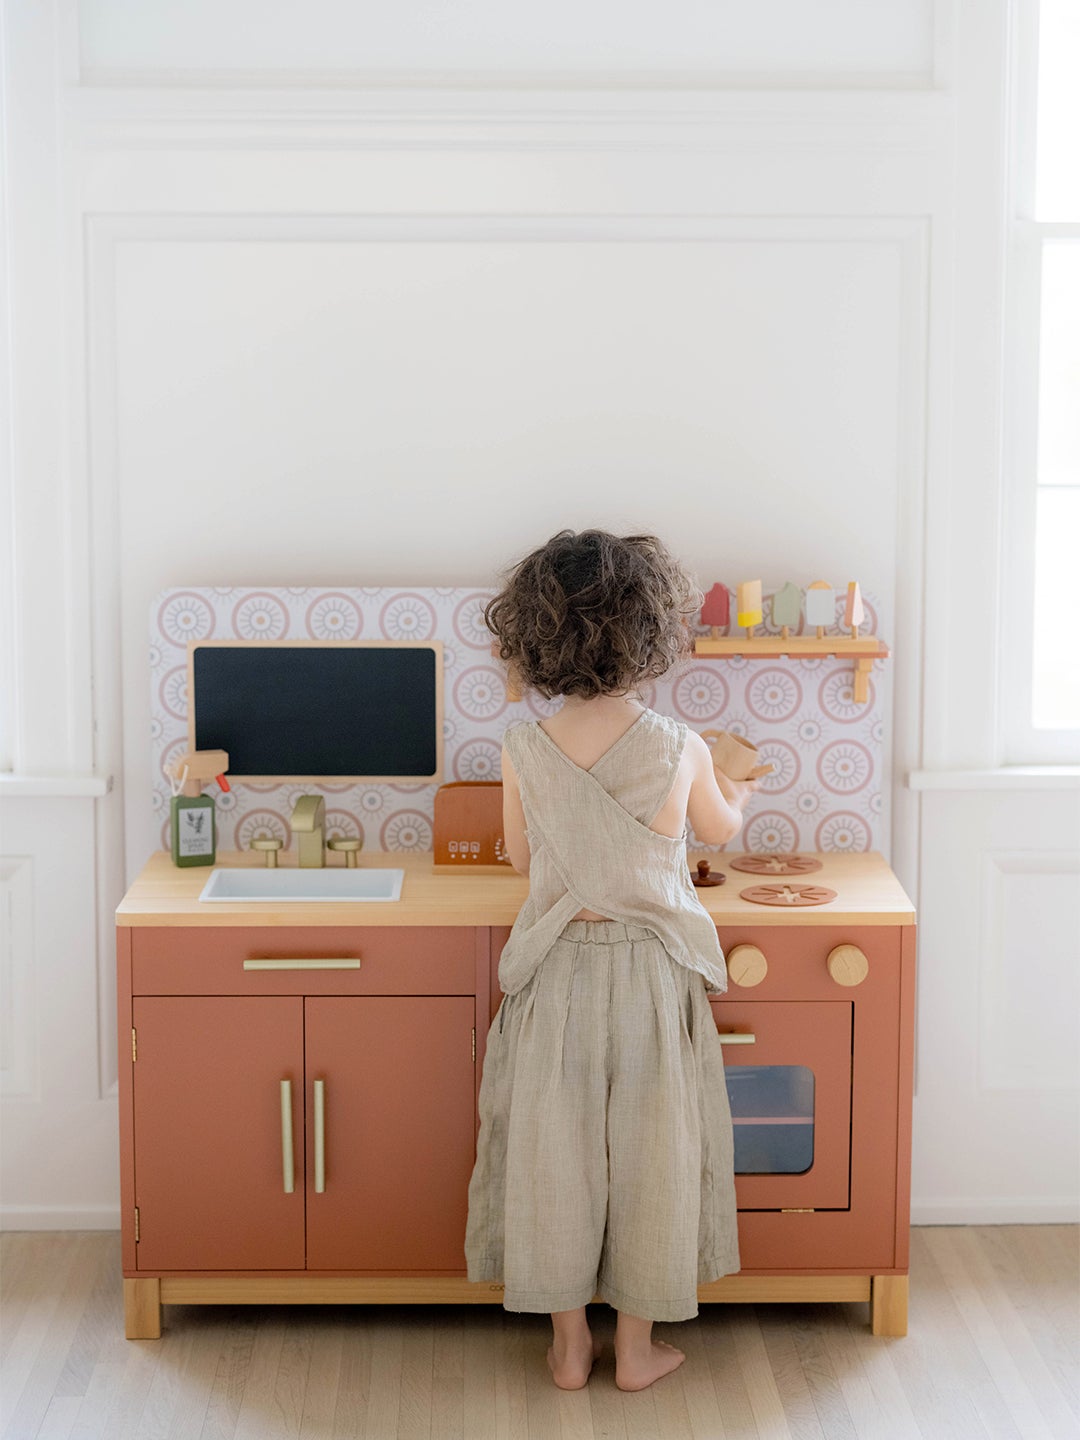 Boy playing with a play kitchen